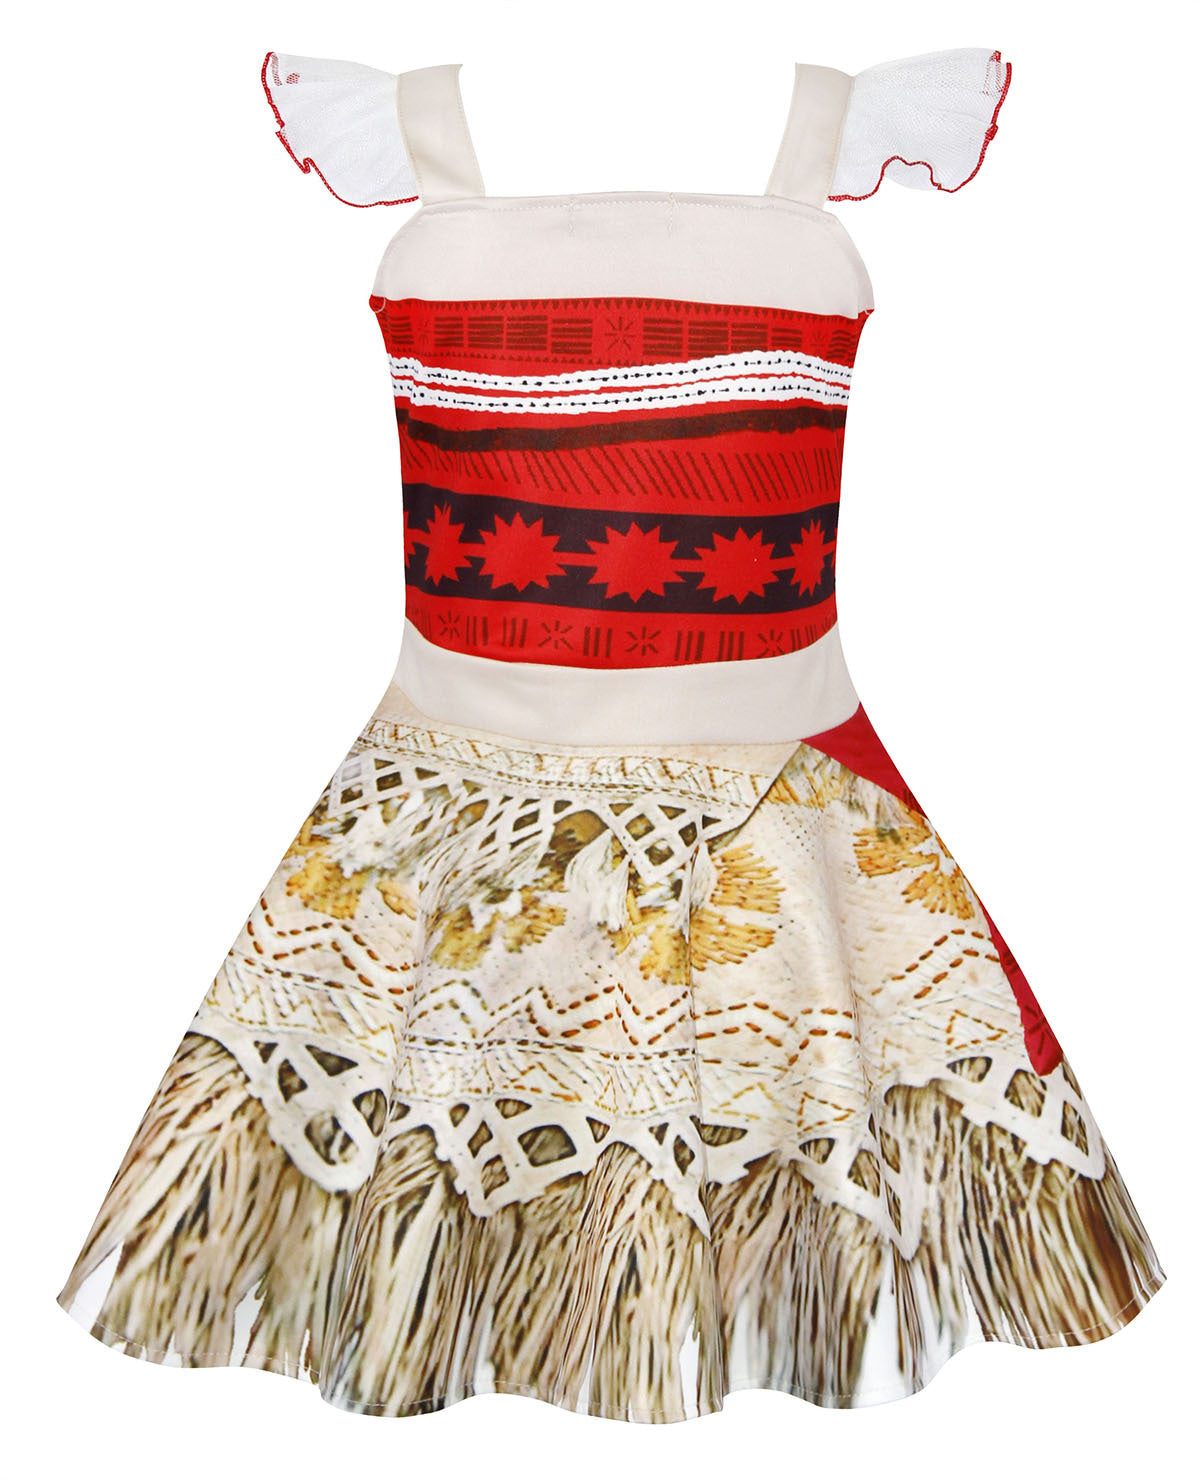 Moana Costume for Kids (Red).